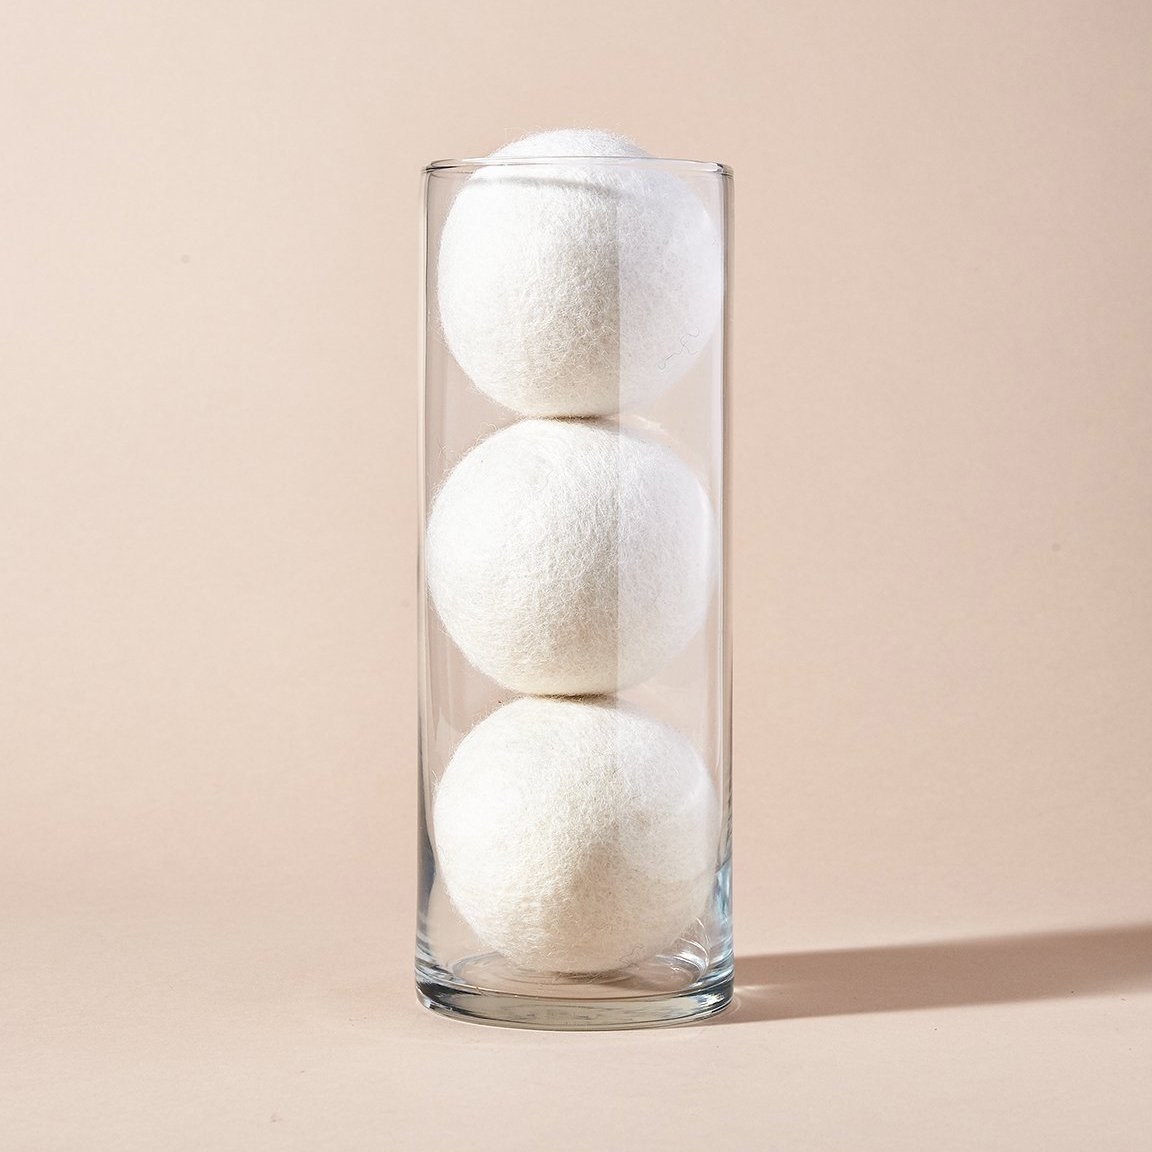 A glass vase with the three large white wool balls